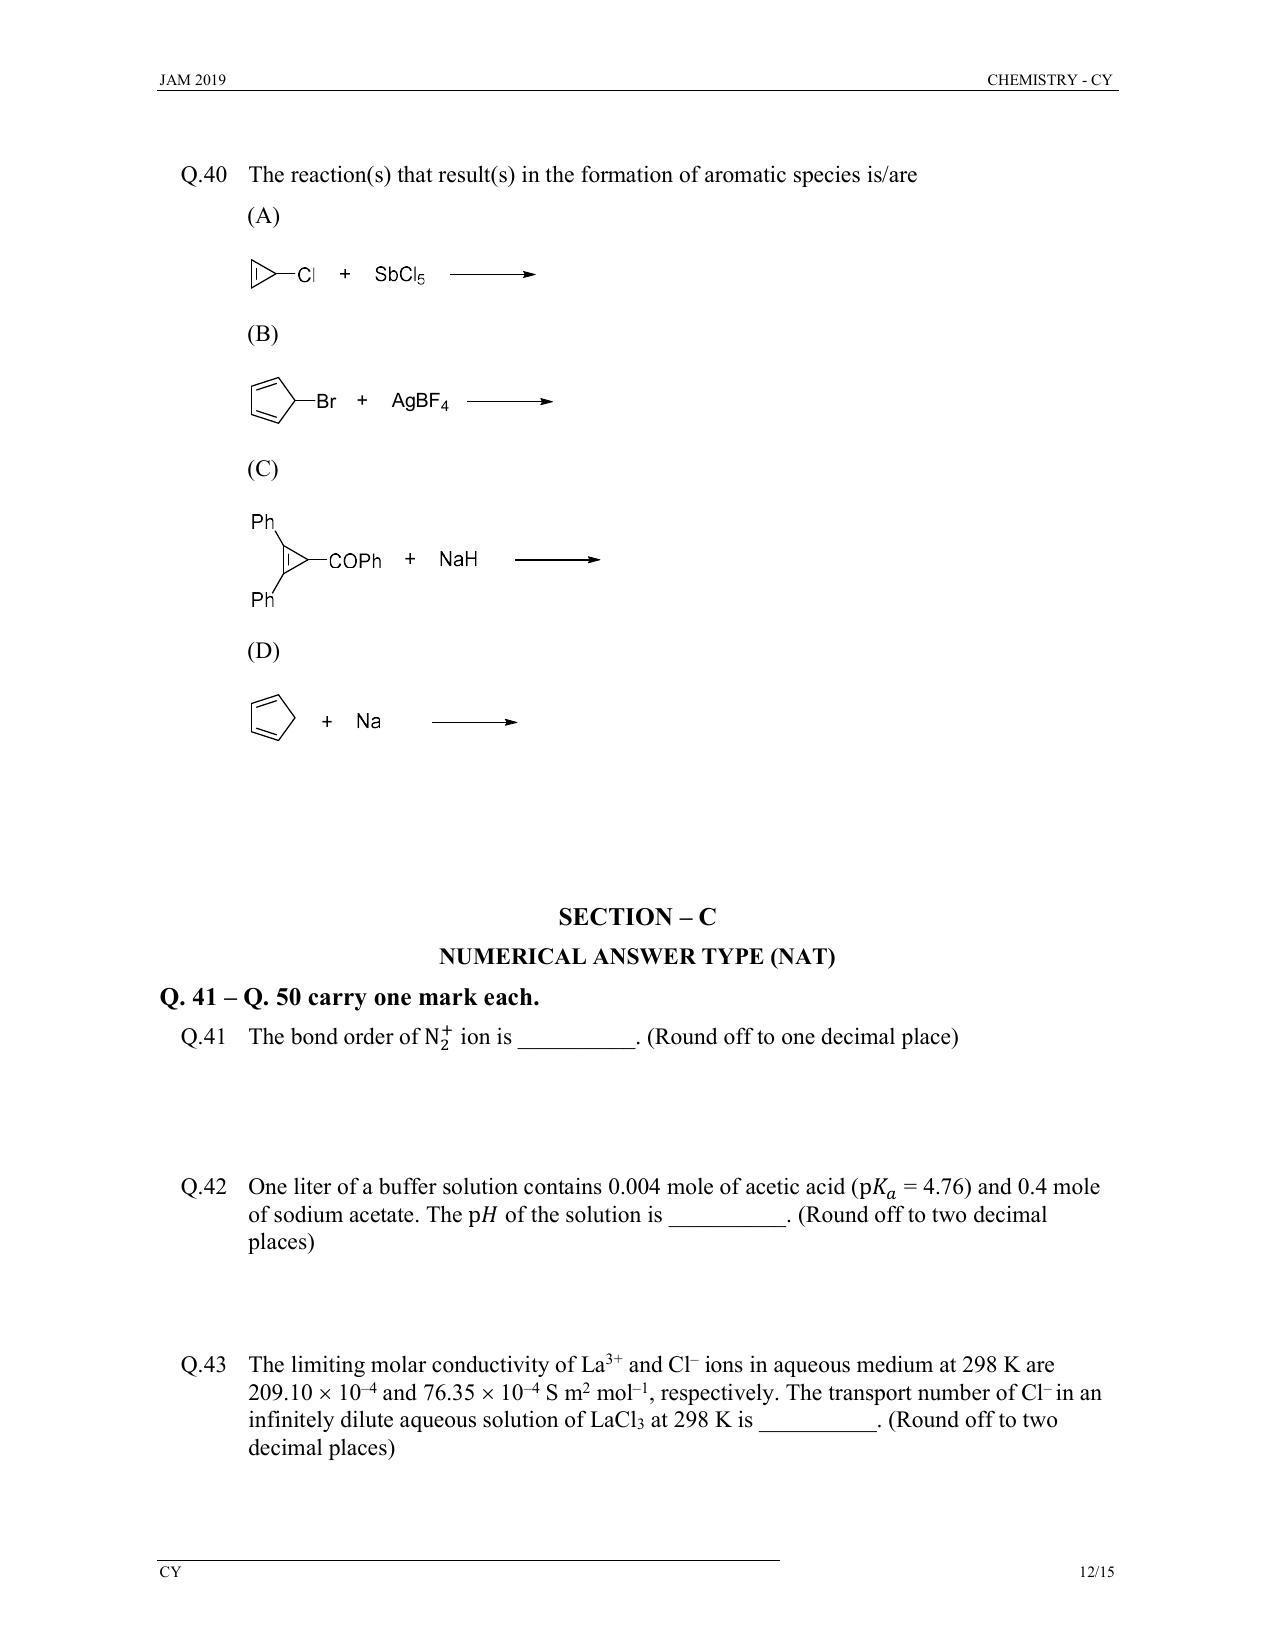 JAM 2019: CY Question Paper - Page 12